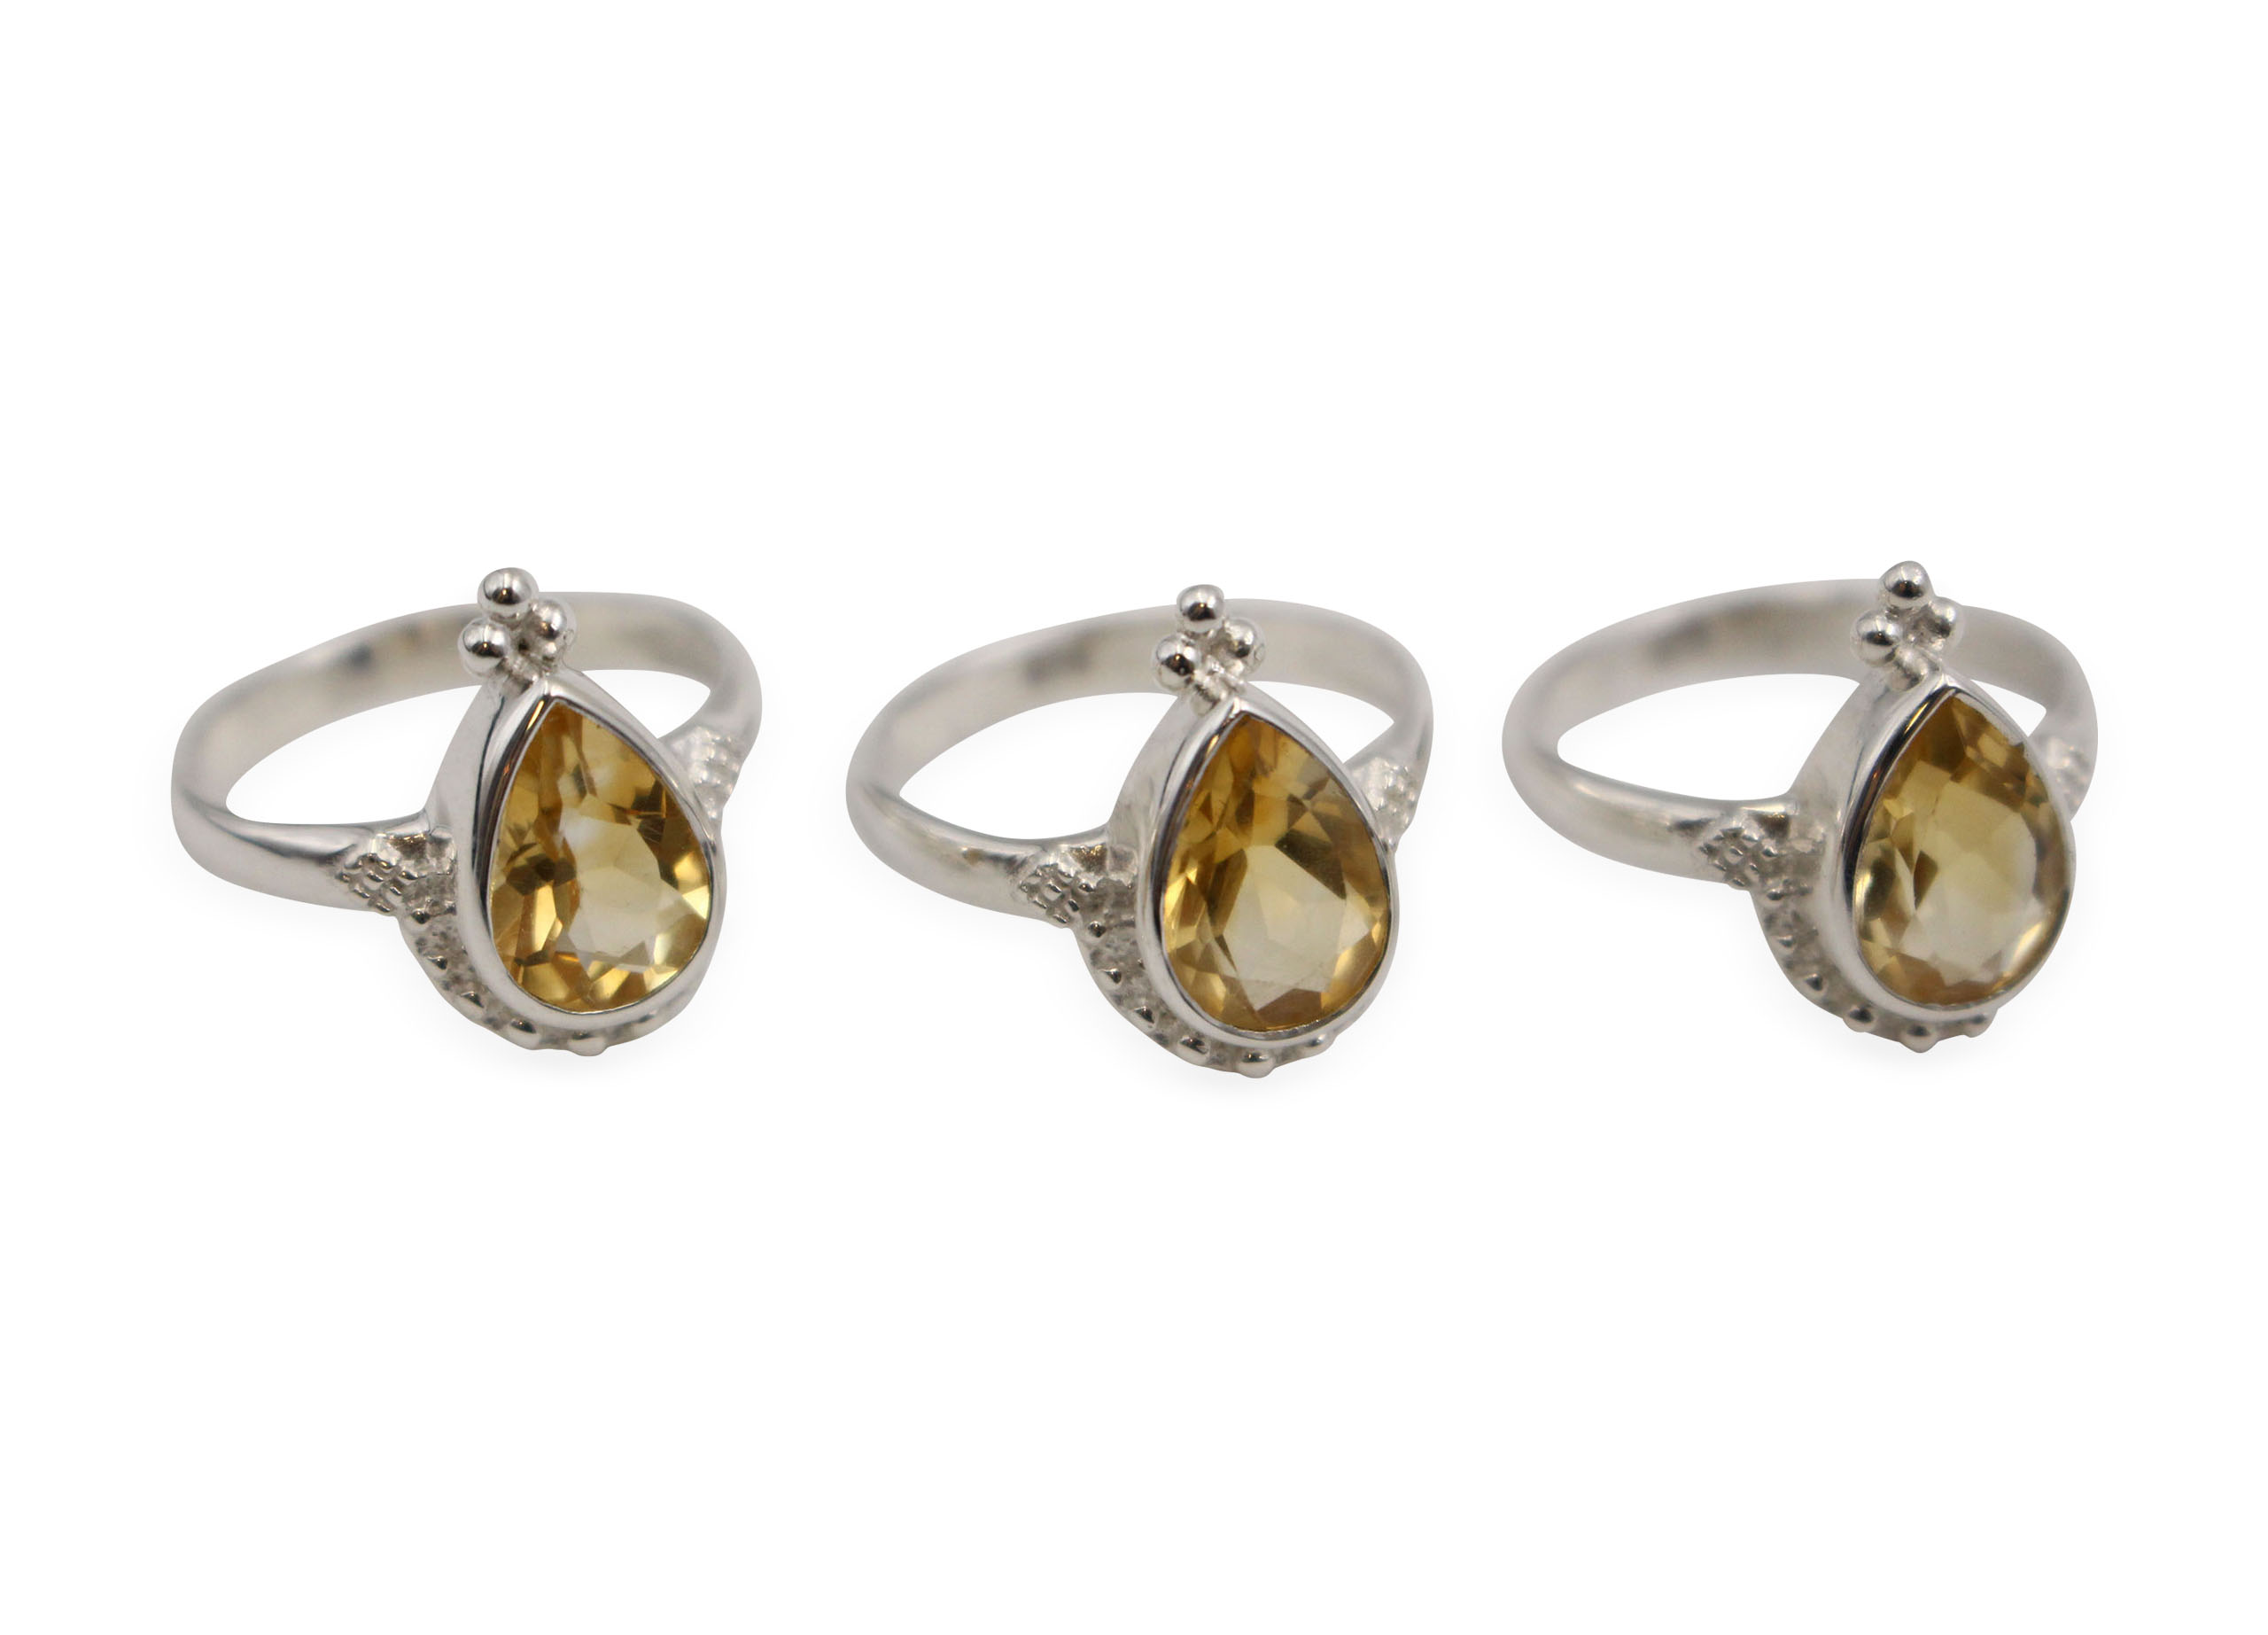 Citrine _Deluxe_ Sterling Silver Ring - Crystal Dreams